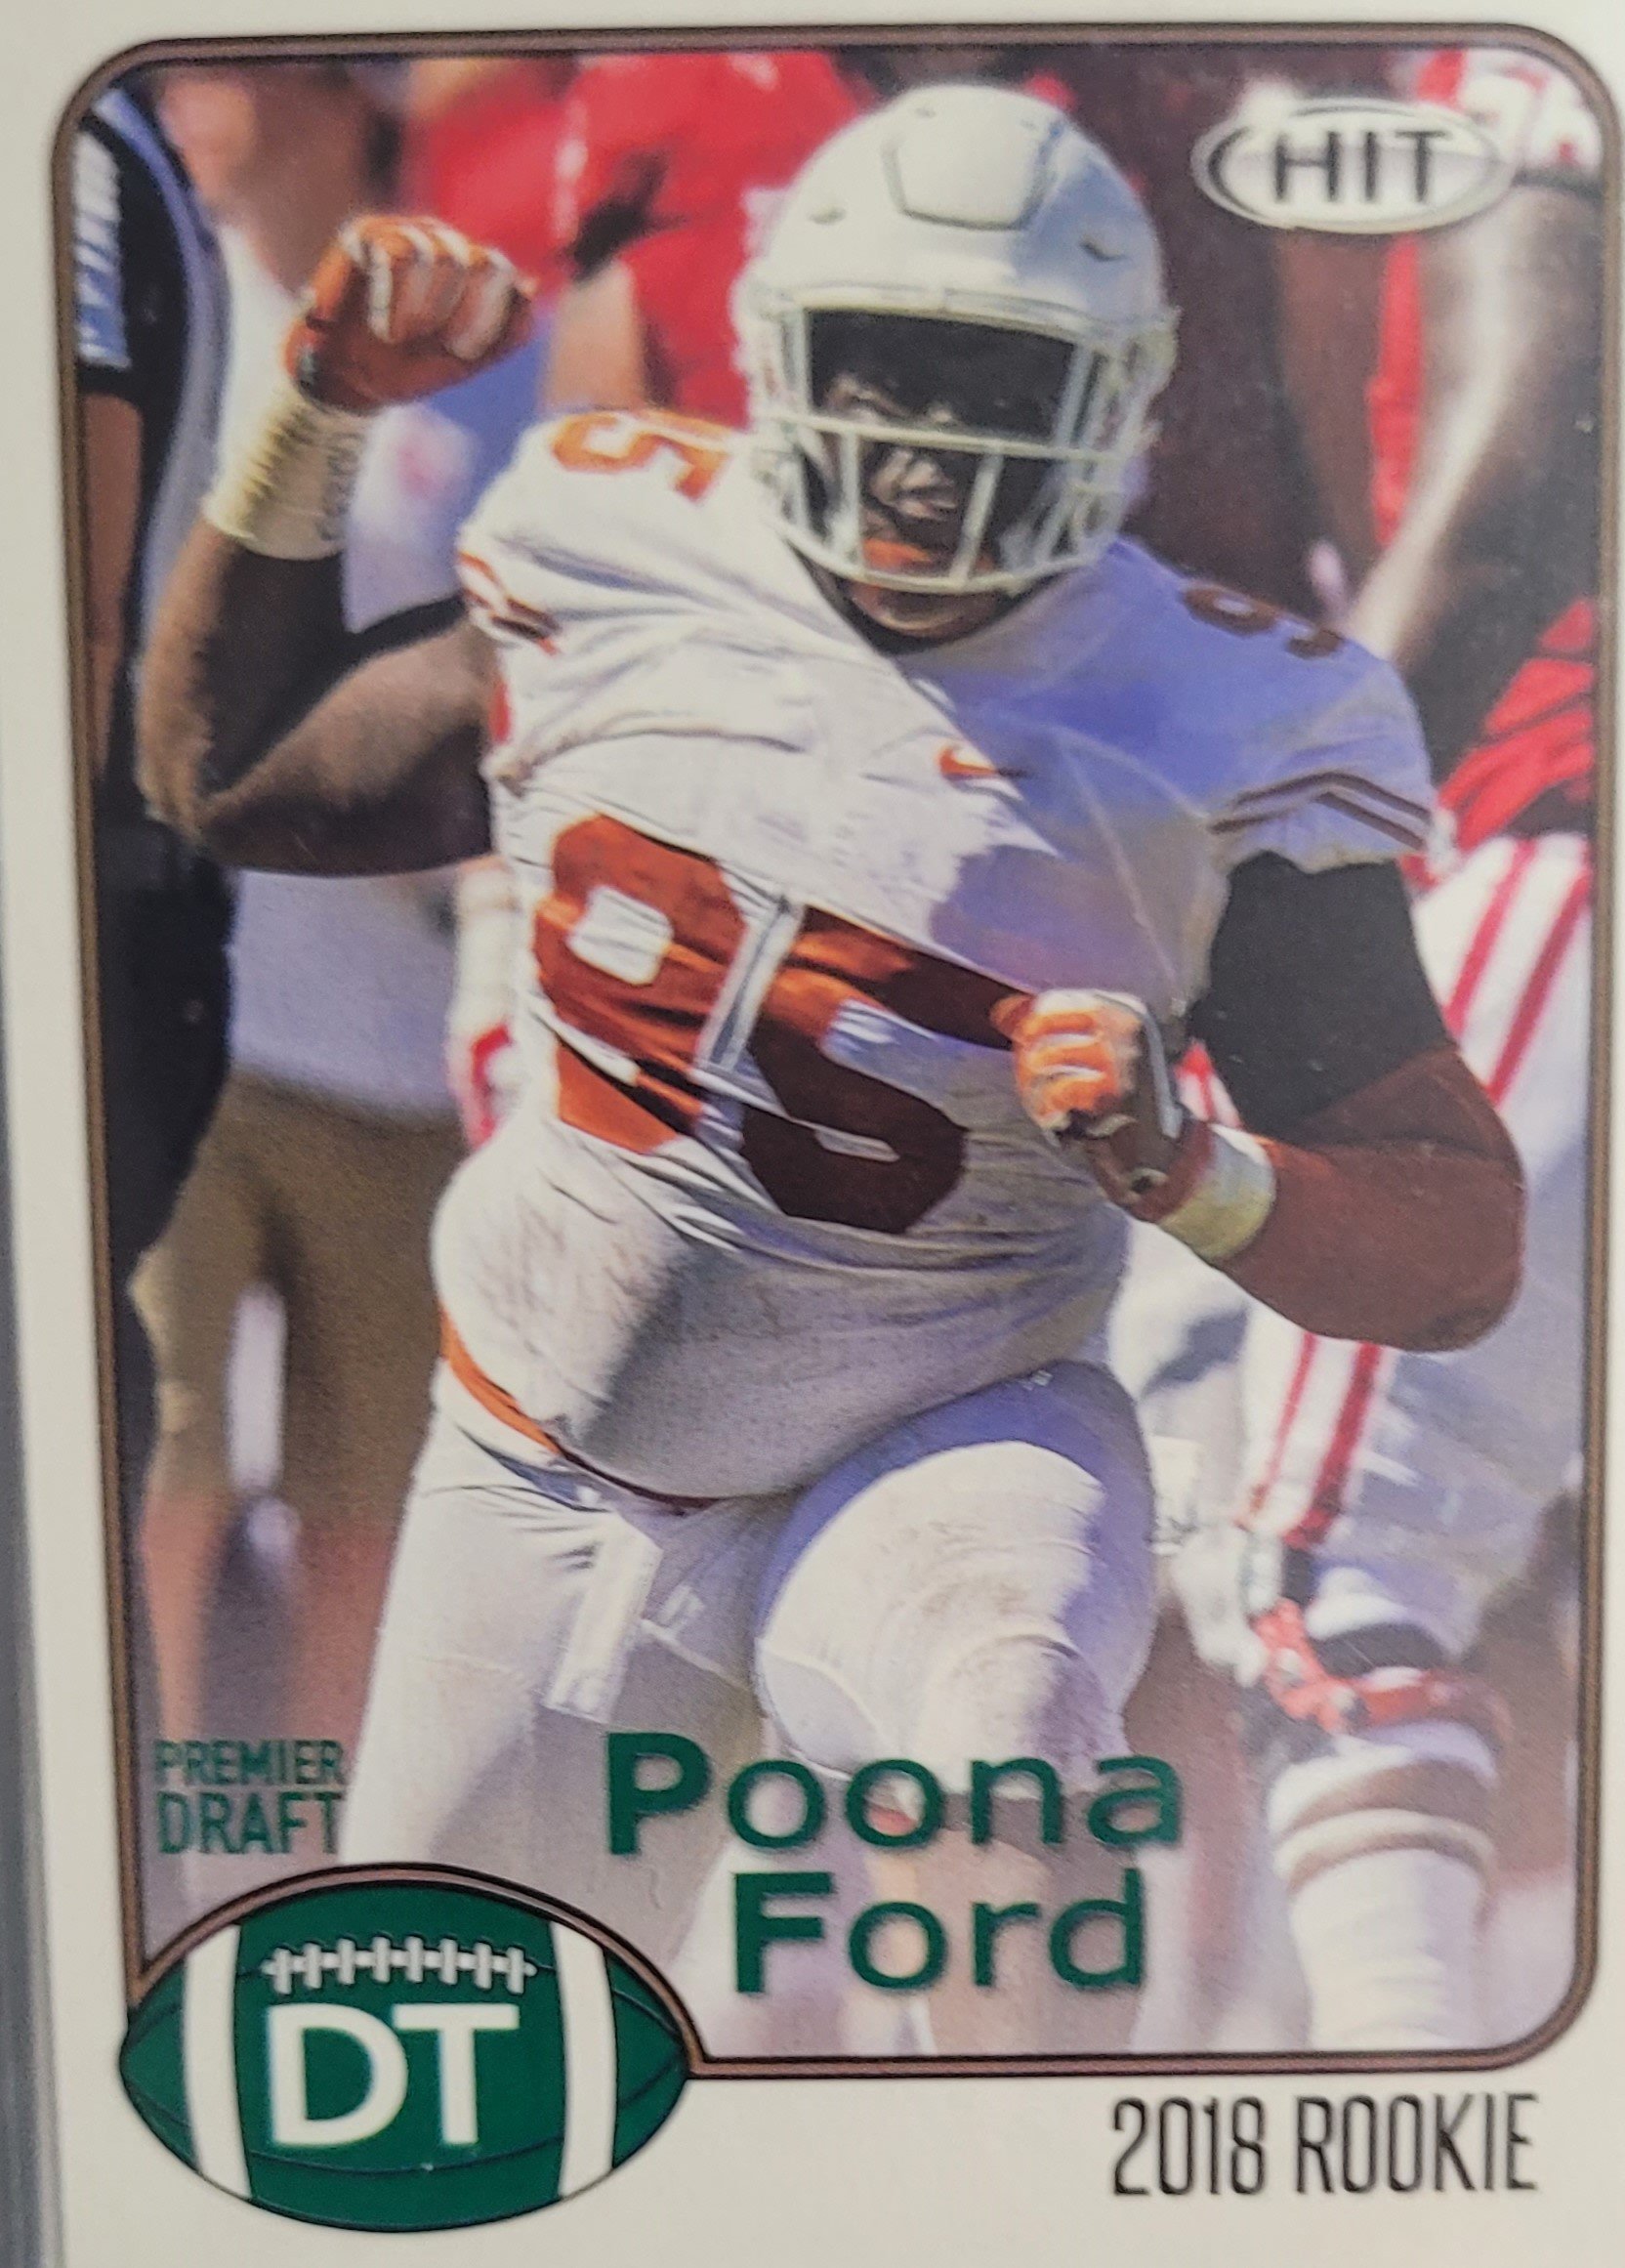 Poona Ford